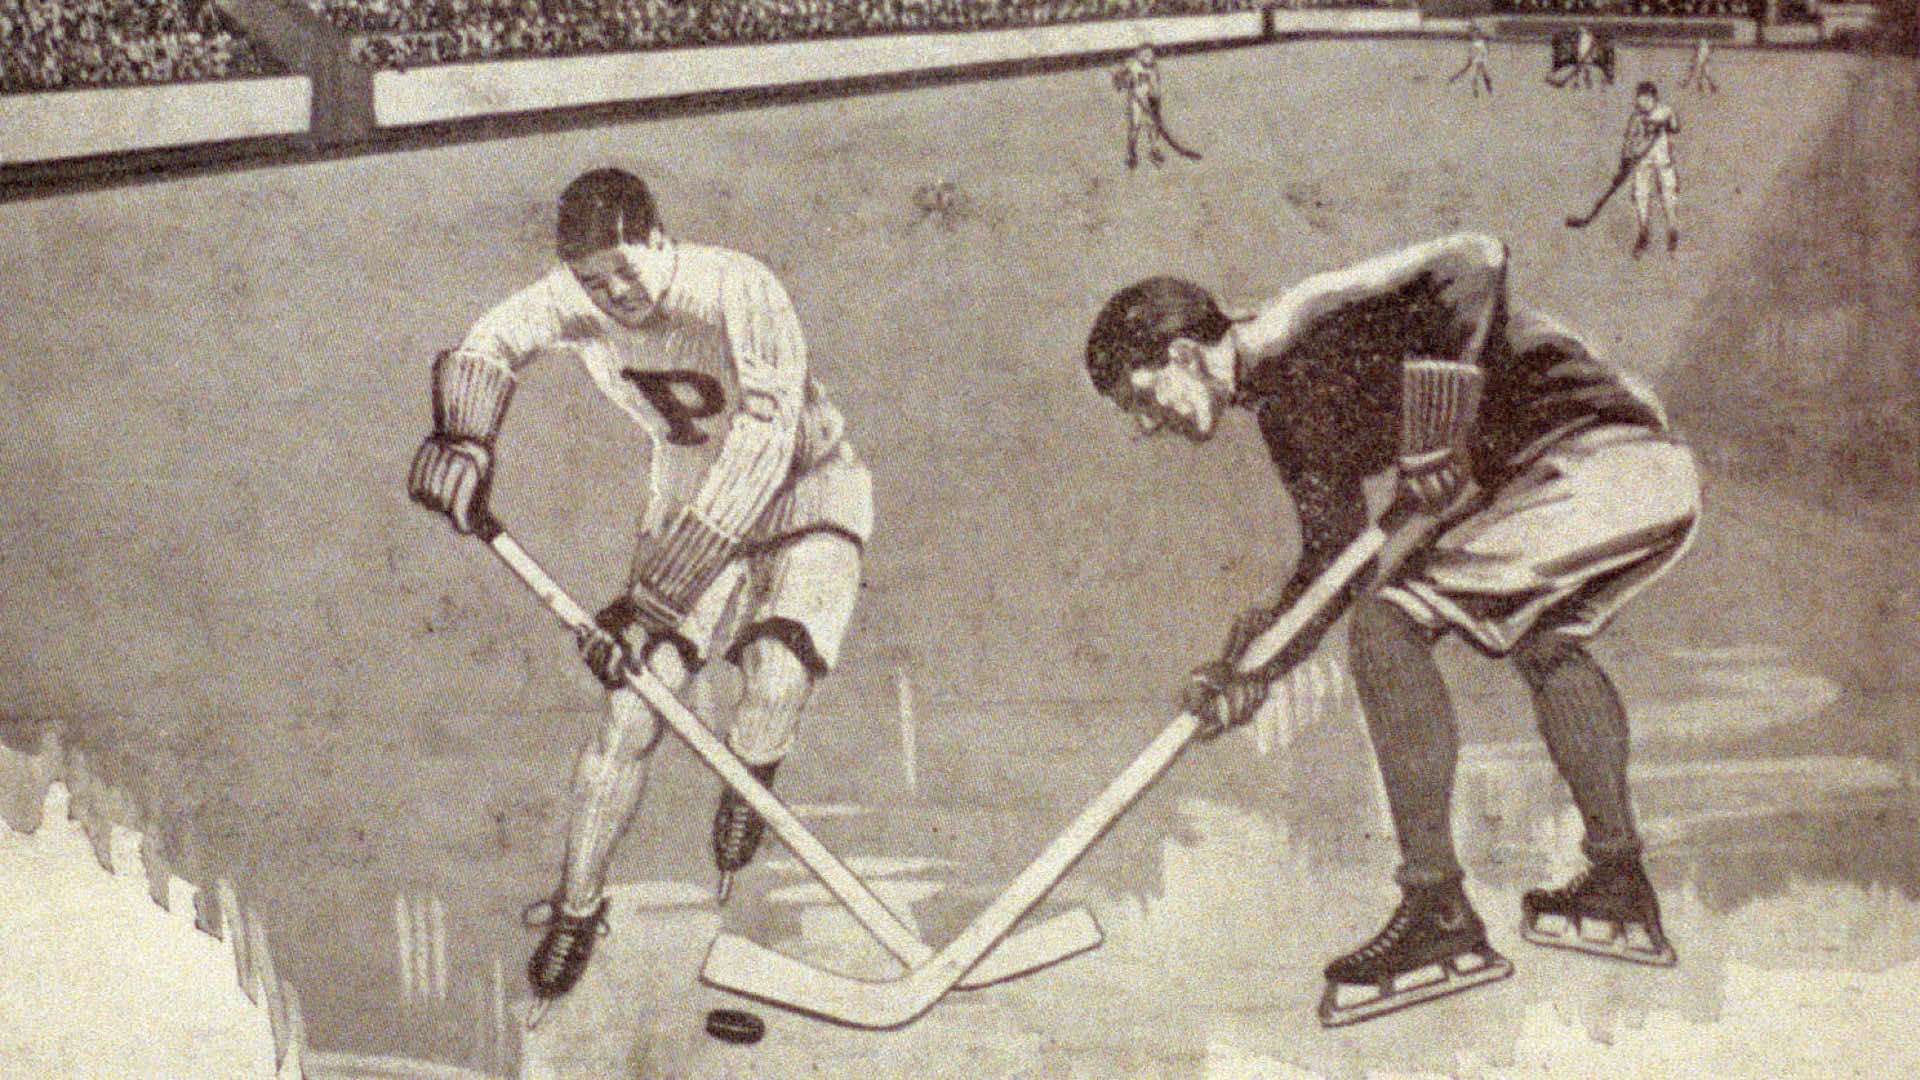 Hockey History: The Pirates - Pittsburgh's First NHL Team - PensBurgh